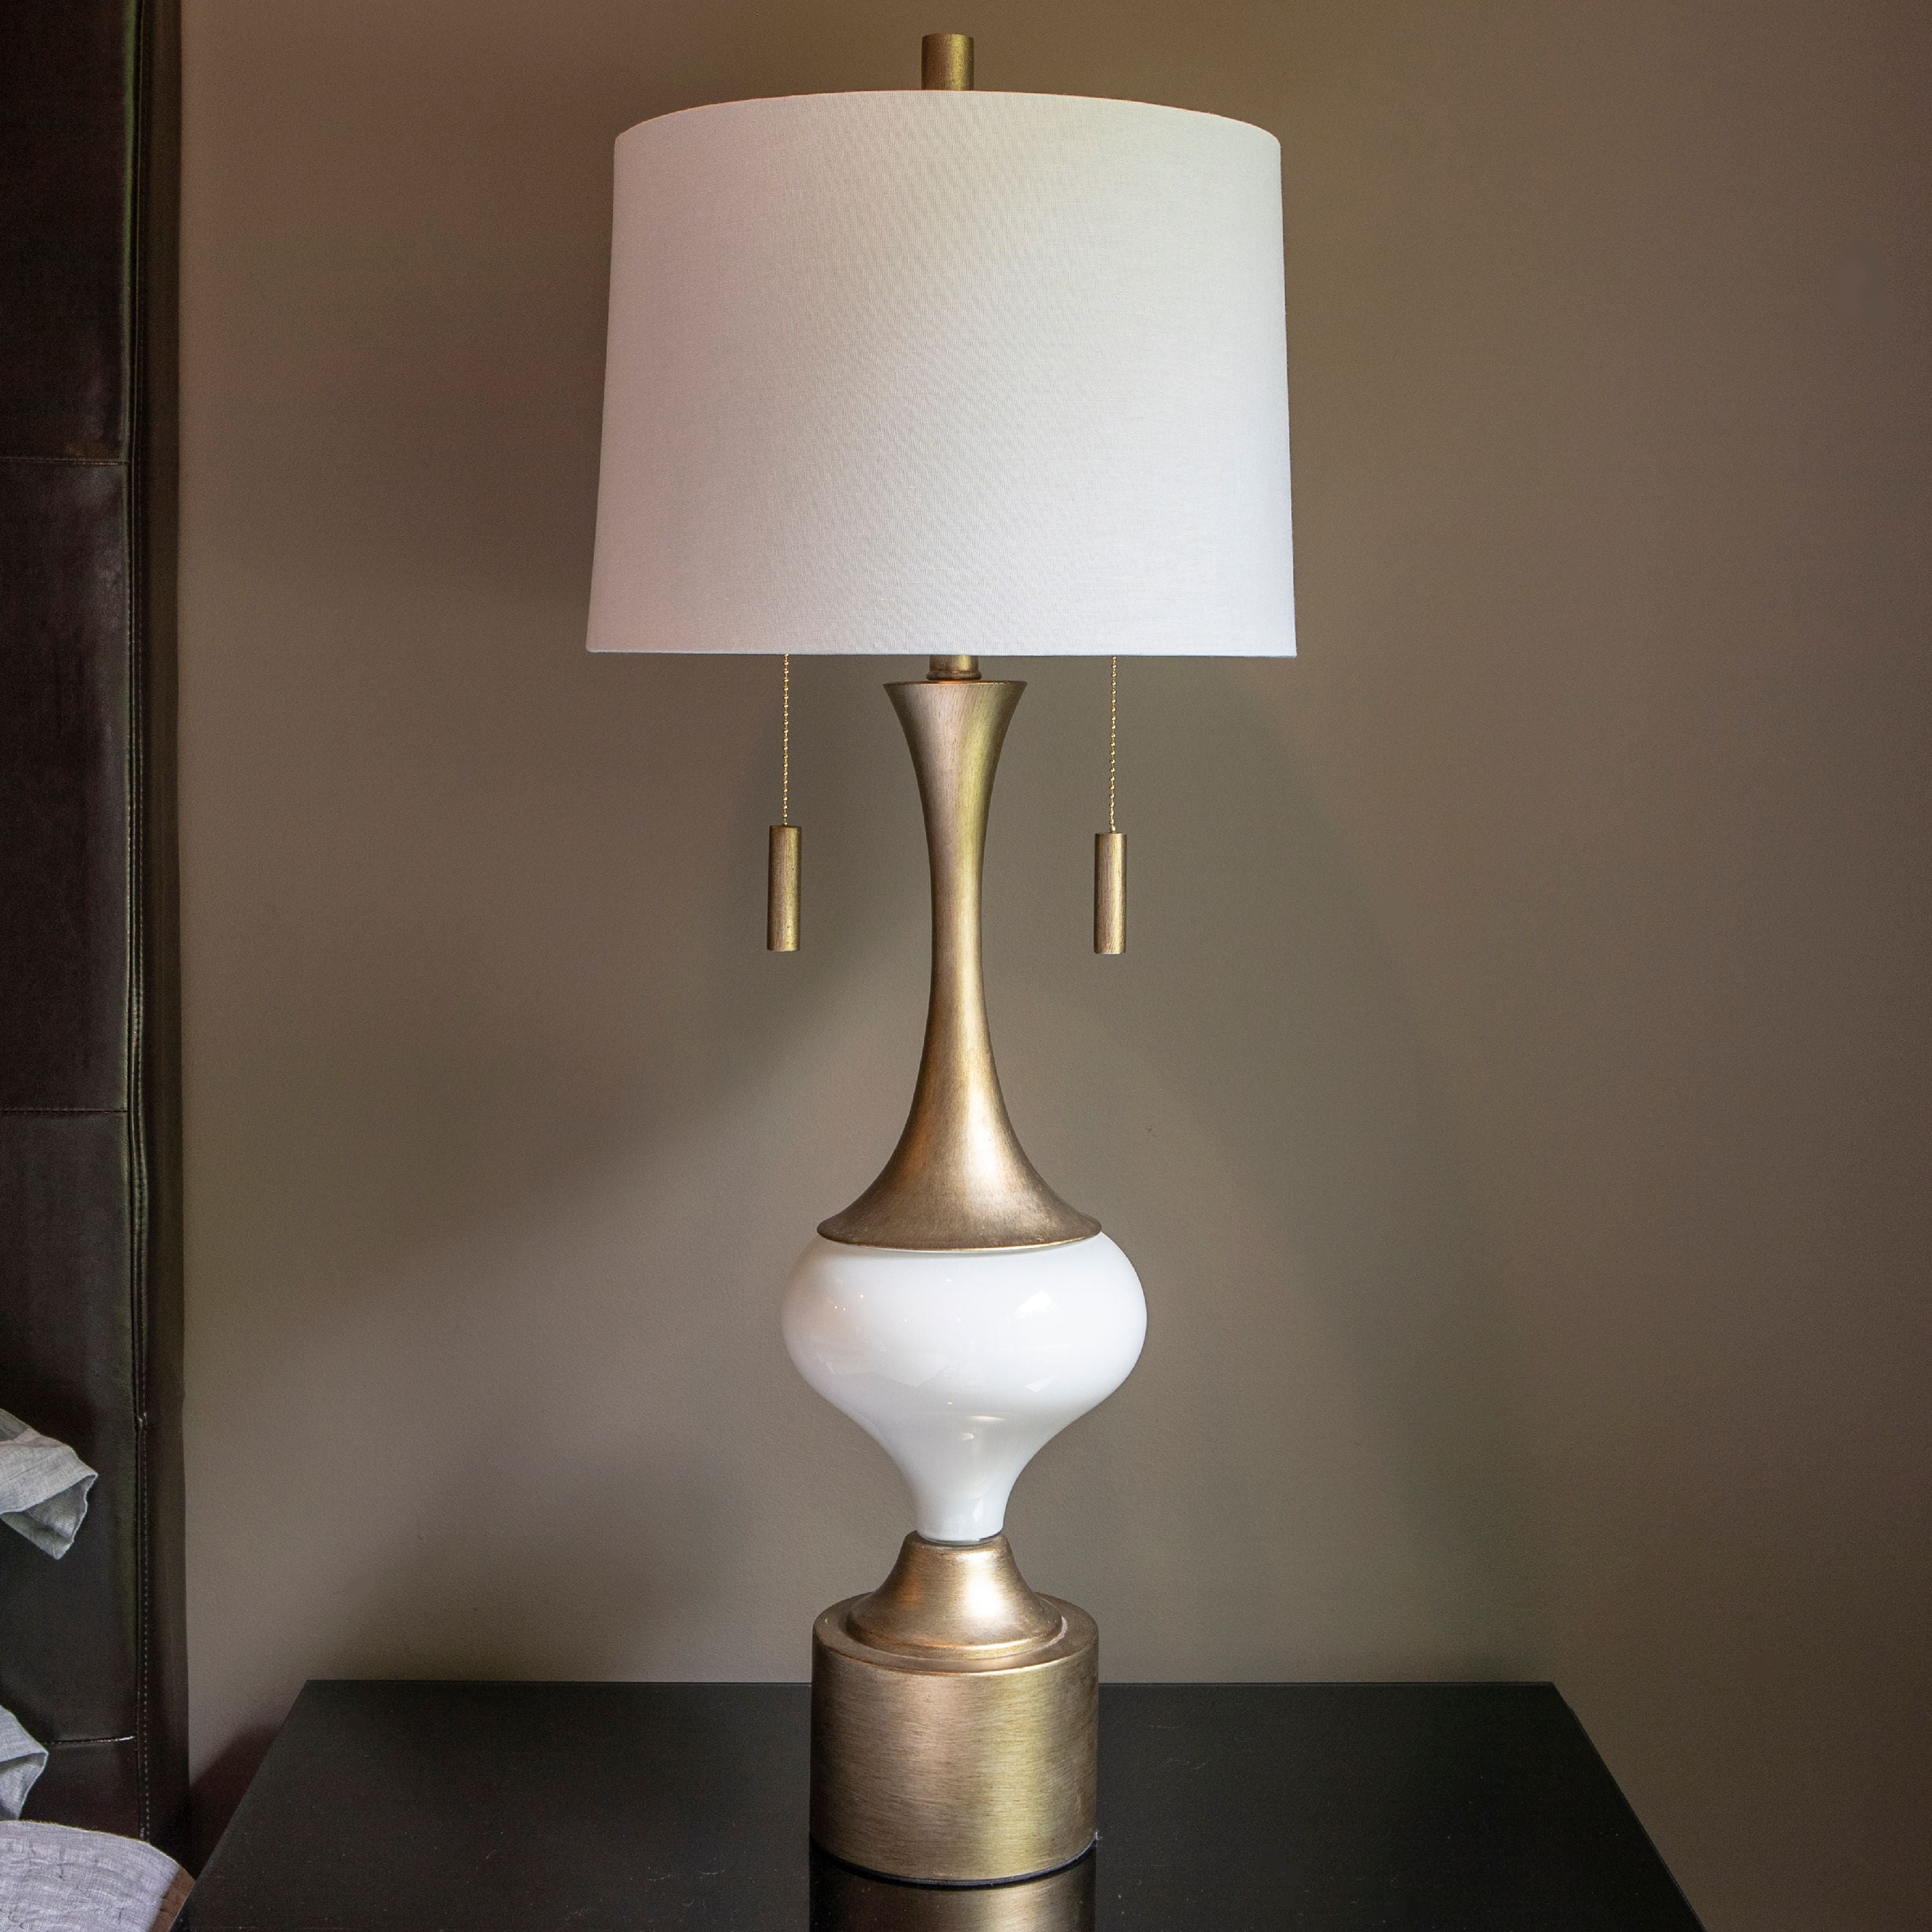 Therapy Vintage Table Lamp White Glass, Antique Vintage Table Lights